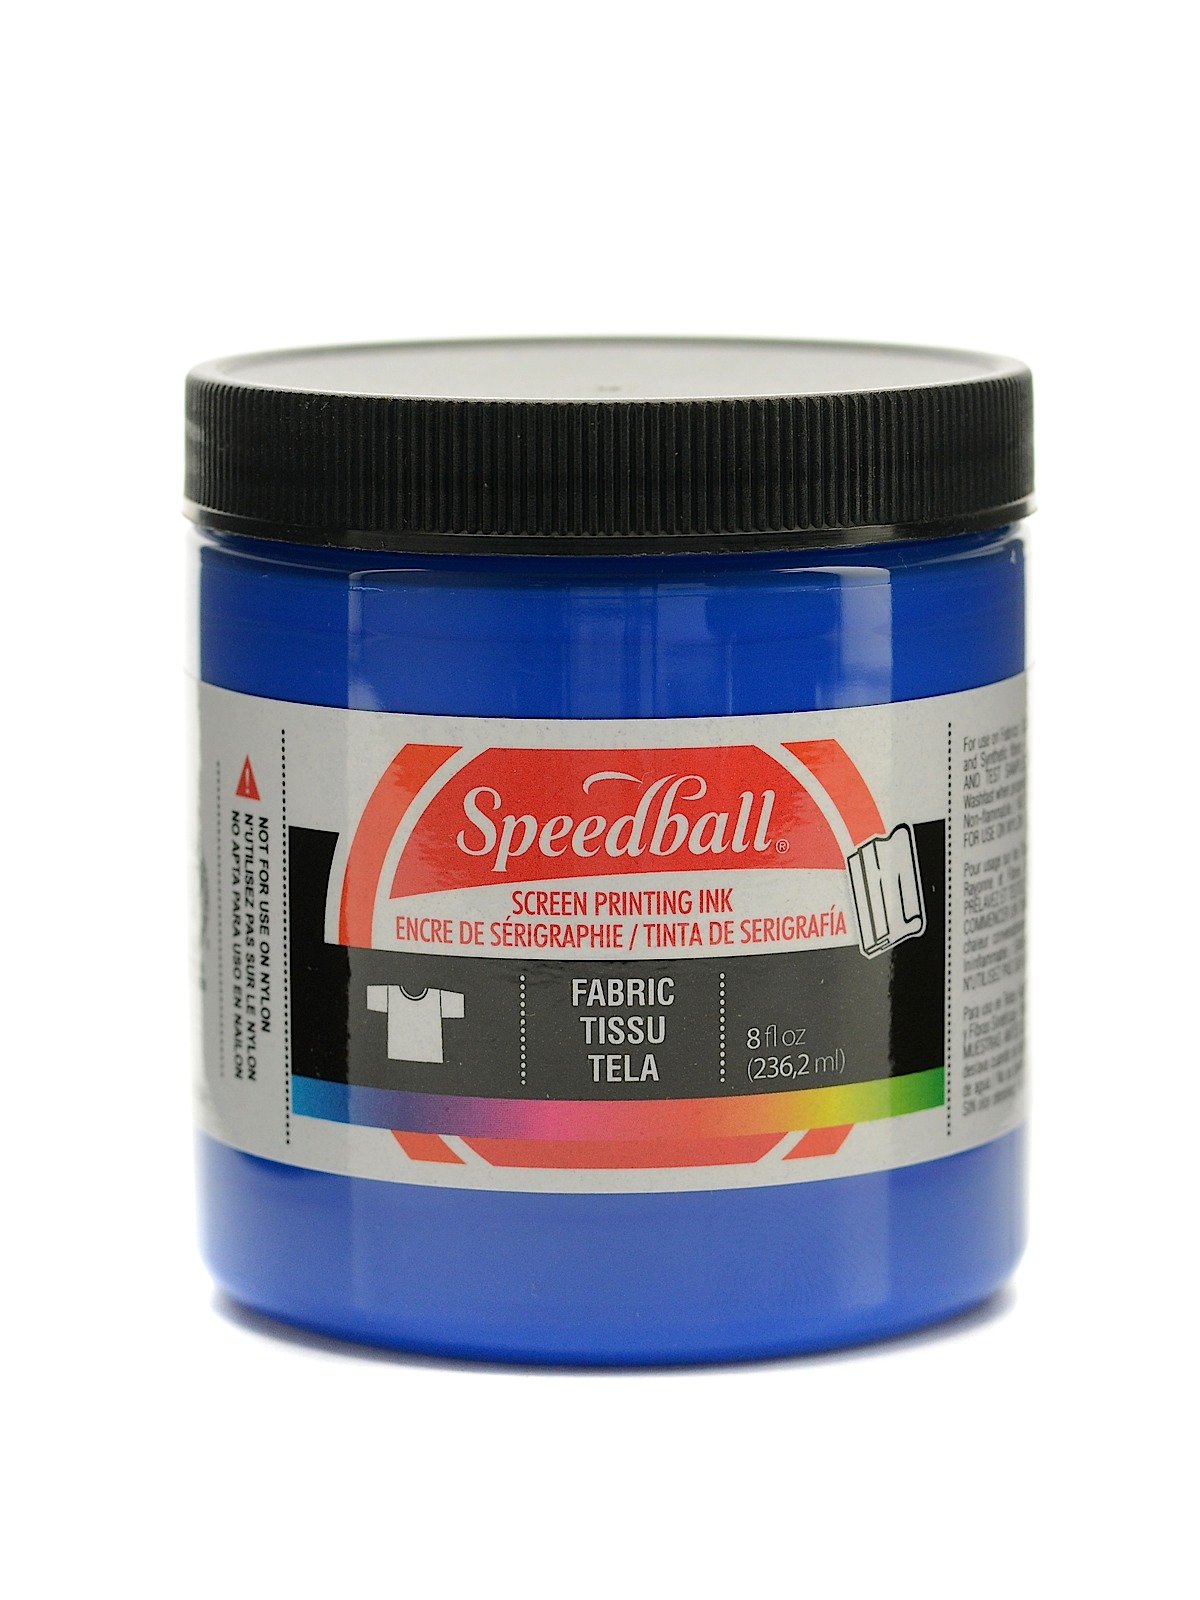 Shop now for the Latest Fashions at Speedball Fine Printmaking